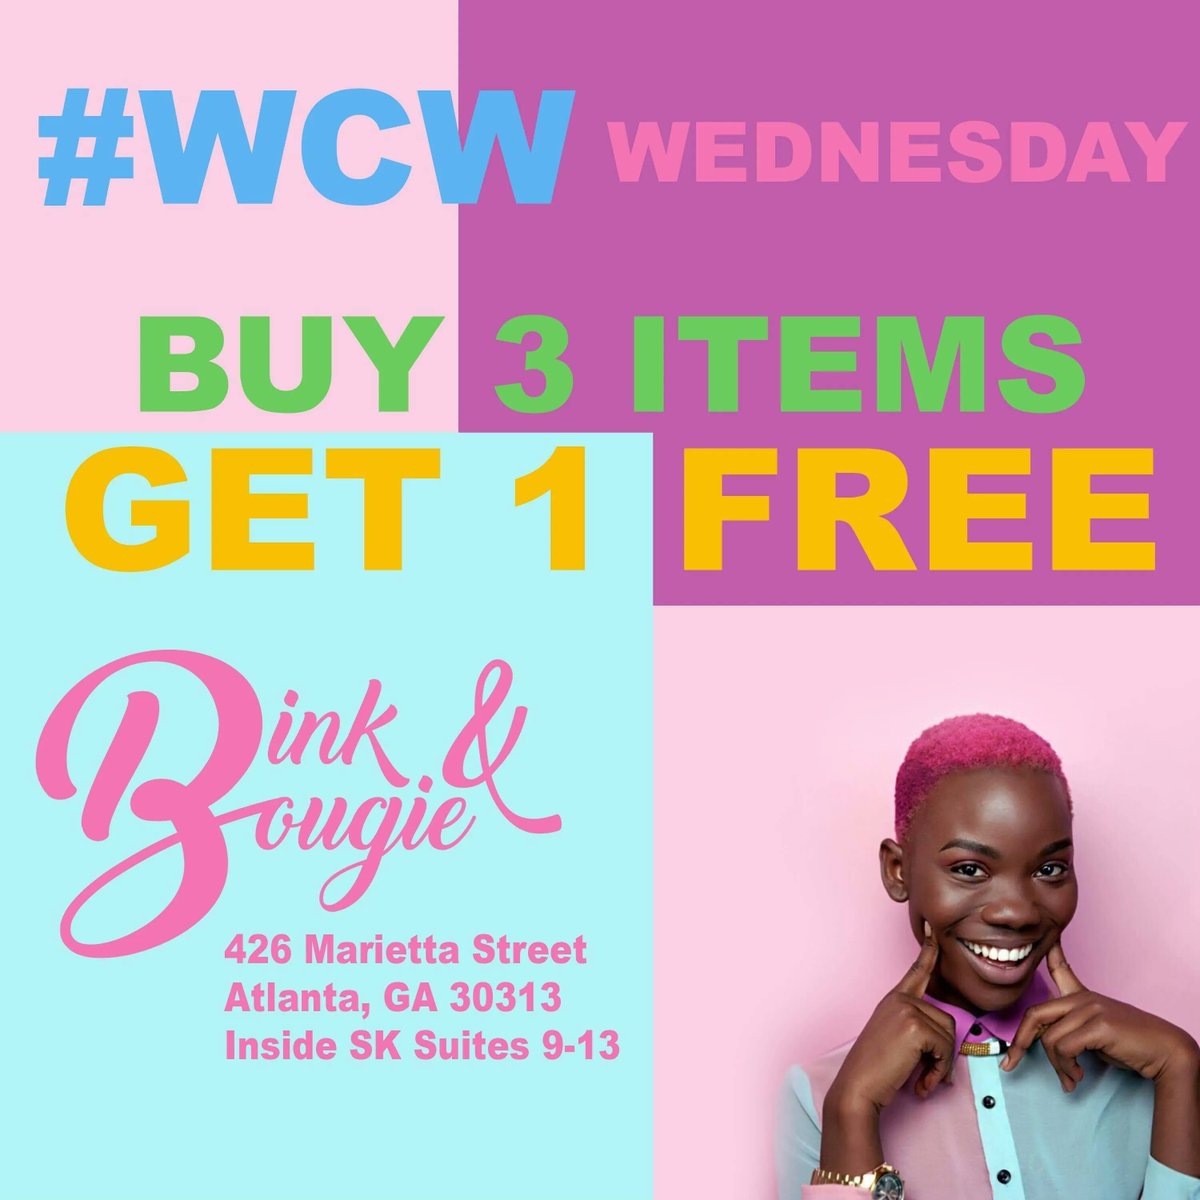 Unleash your inner fashionista this WCW Wednesday! 💃🛍️ Our Chattahoochee location presents an irresistible deal: Elevate your style game with Buy 3, Get 1 Free on all clothes. Embrace the midweek shopping spree and turn heads with your new looks!  

#binkandbougie #atlboutique